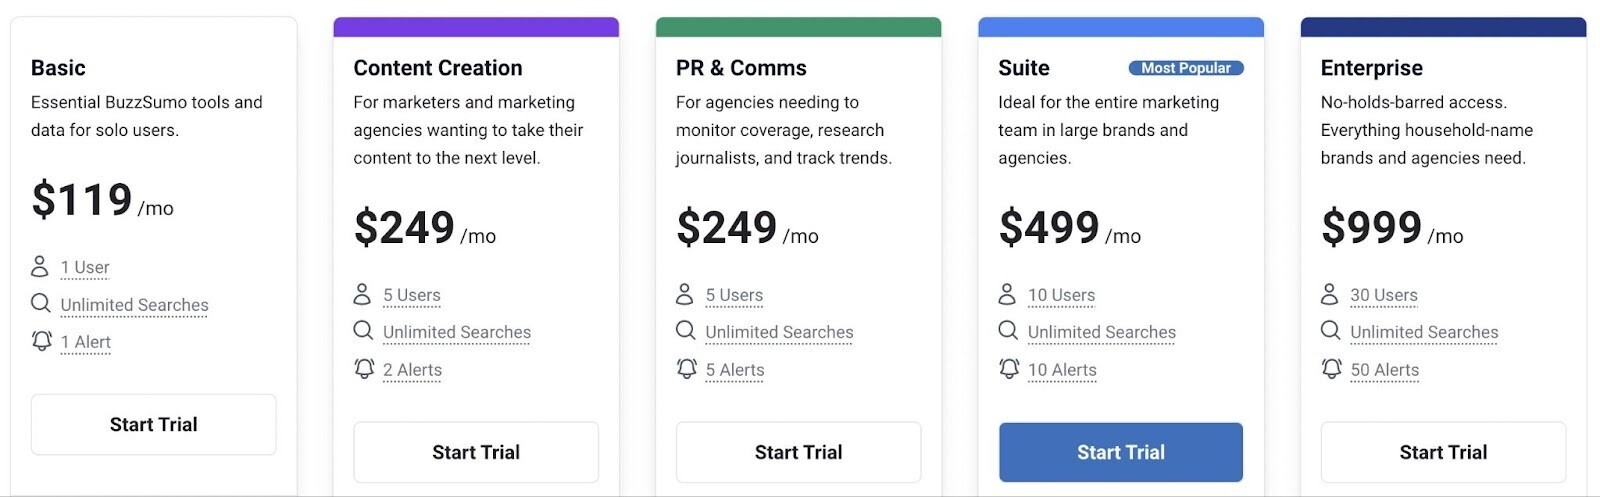 BuzzSumo’s pricing page showing prices for Basic, Content Creation, PR & Comms, Suite and Enterprise plans